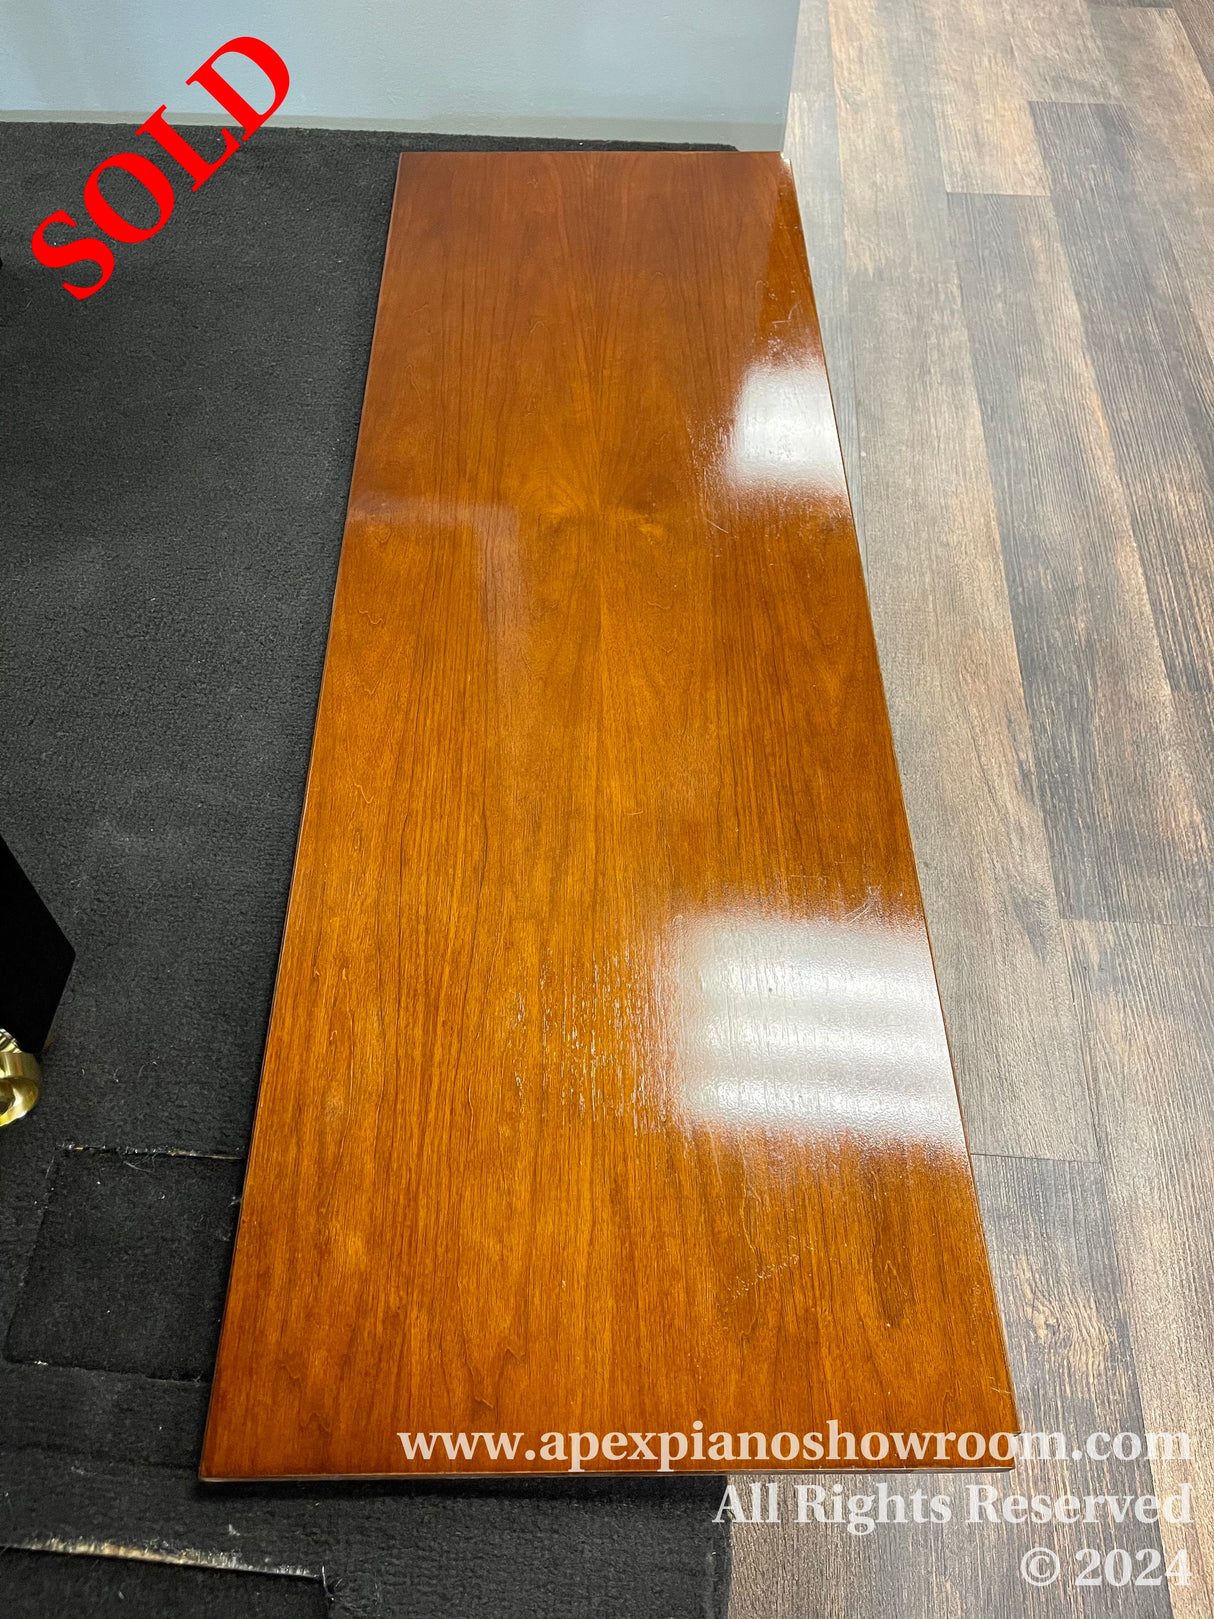 A glossy finished piano fallboard with rich mahogany color, resting on the floor against a black mat and grey wood-patterned flooring.